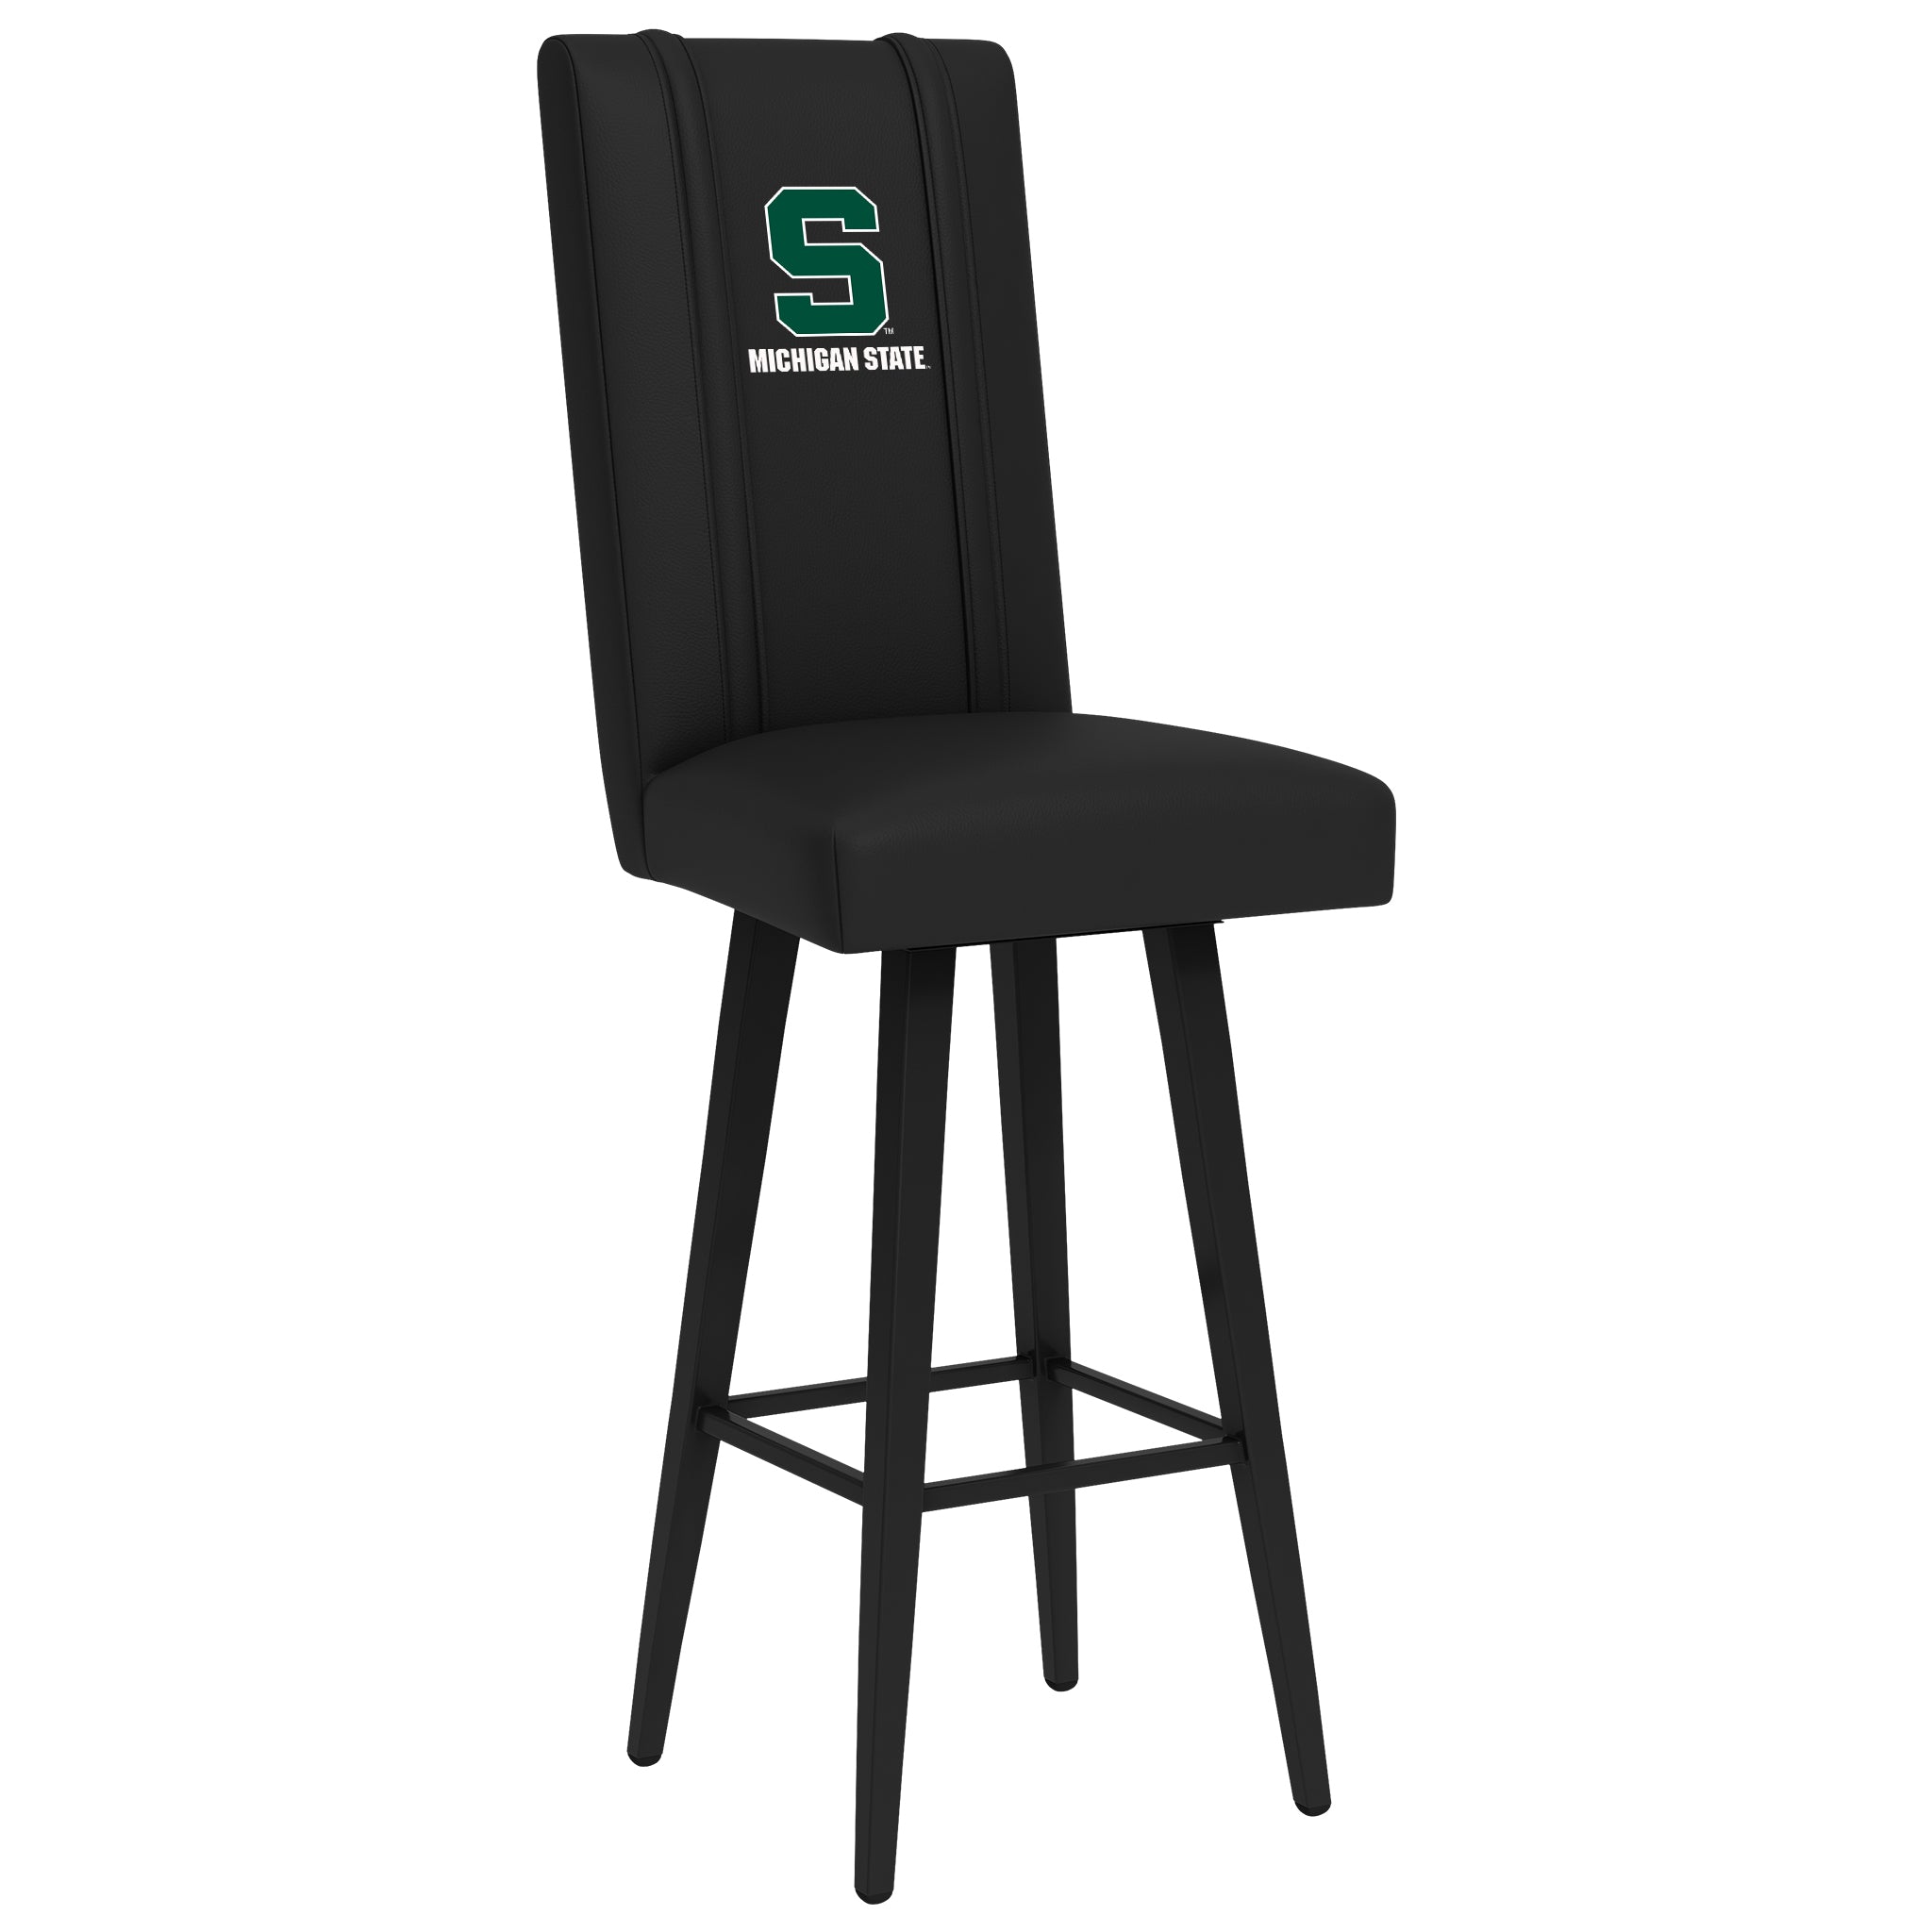 Michigan State Spartans Swivel Bar Stool 2000 With Michigan State Secondary Logo